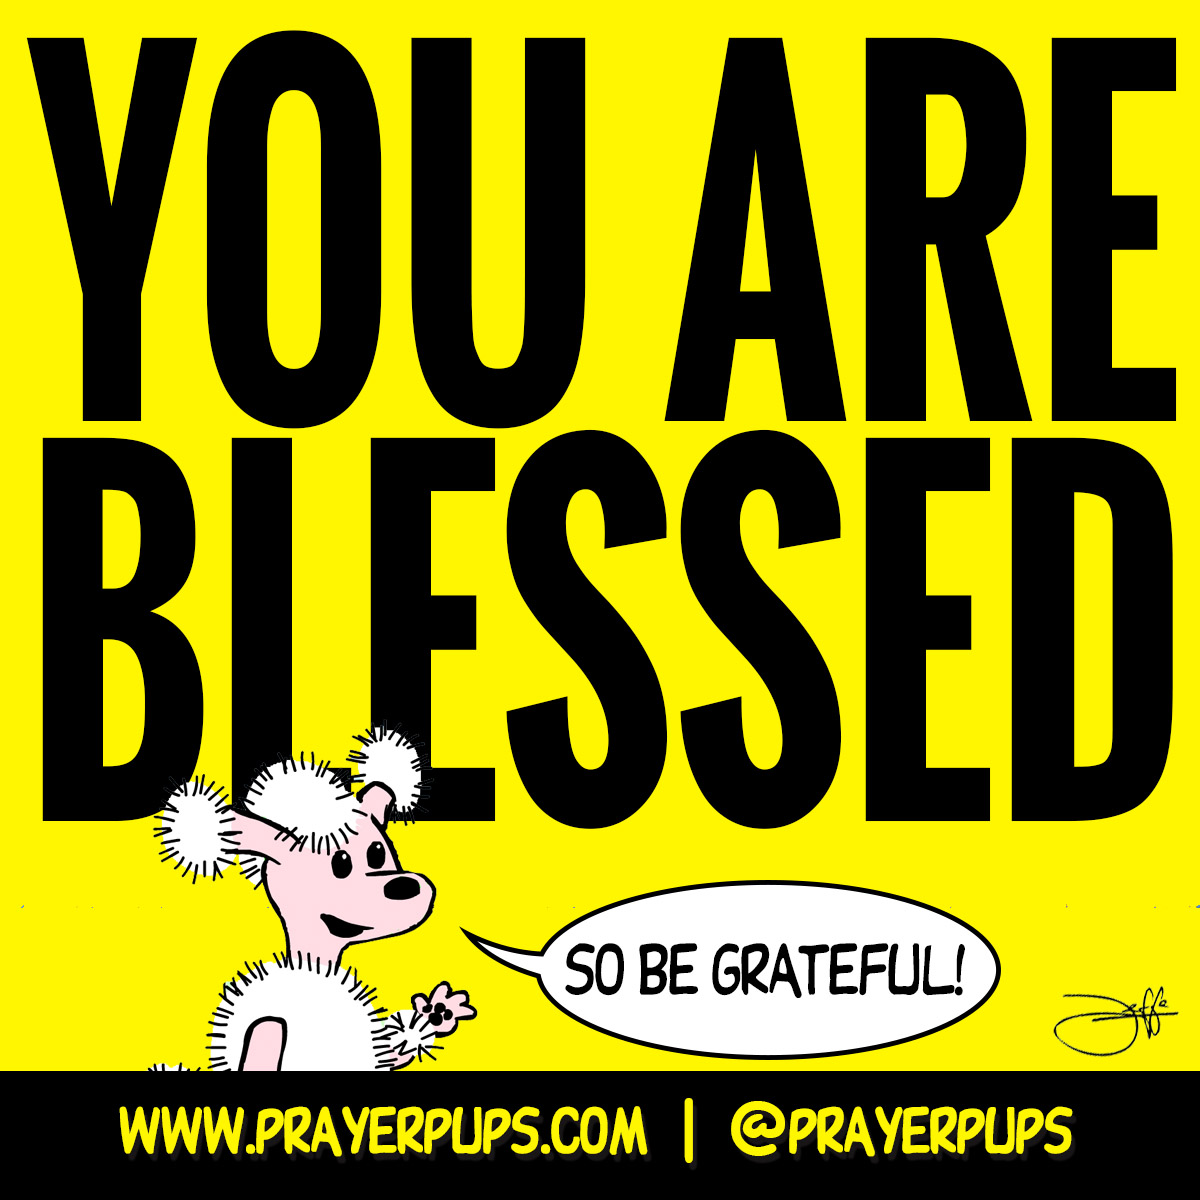 You Are Blessed!